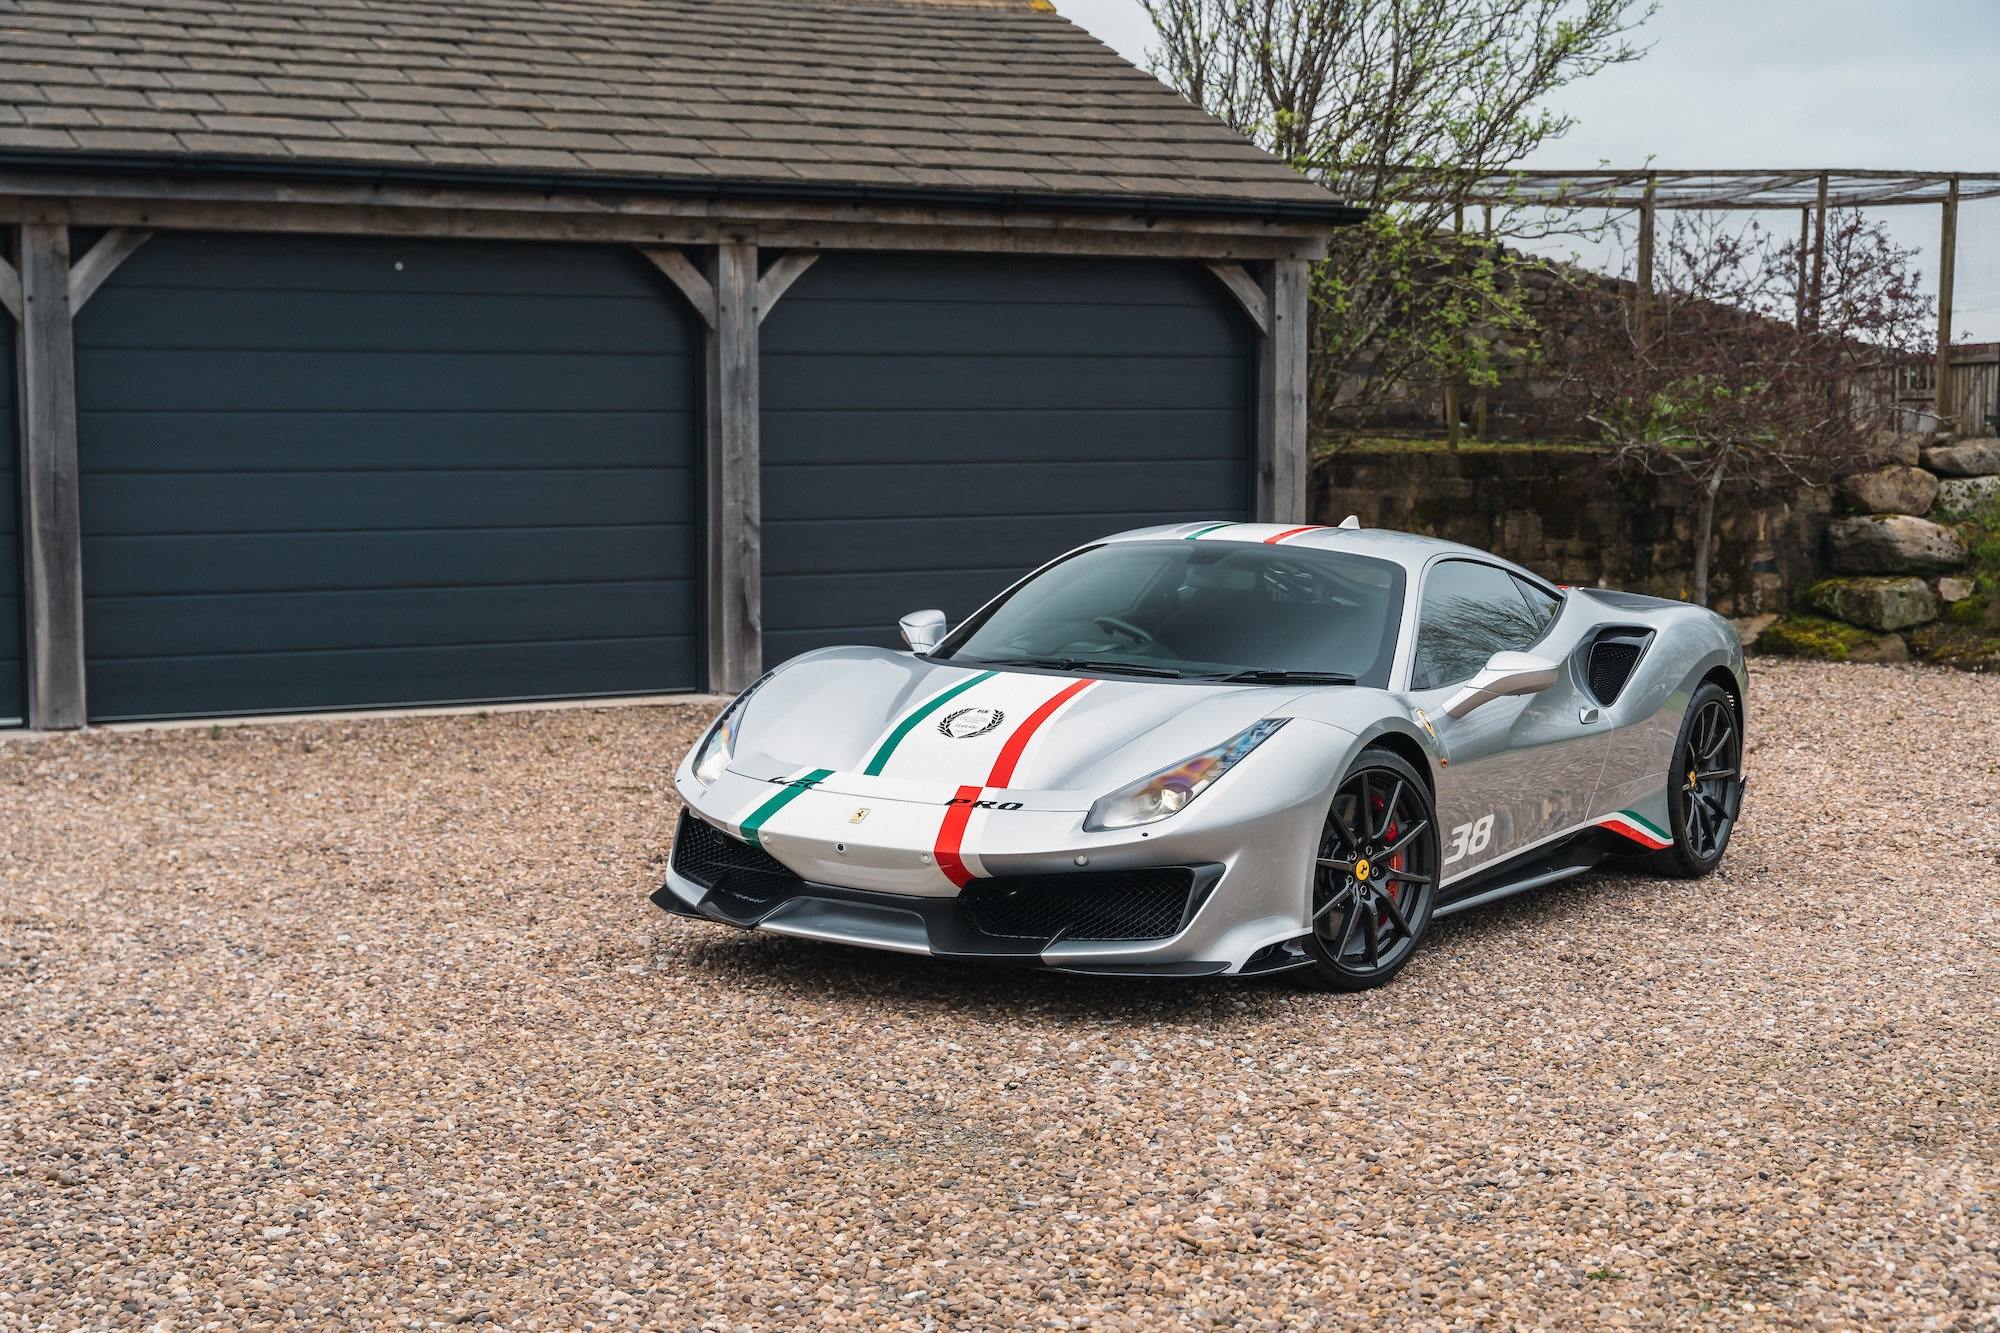 This Ferrari 488 Pista Piloti is a striking limited-edition track-focused modern supercar, with little more than delivery mileage on the odometer. 0